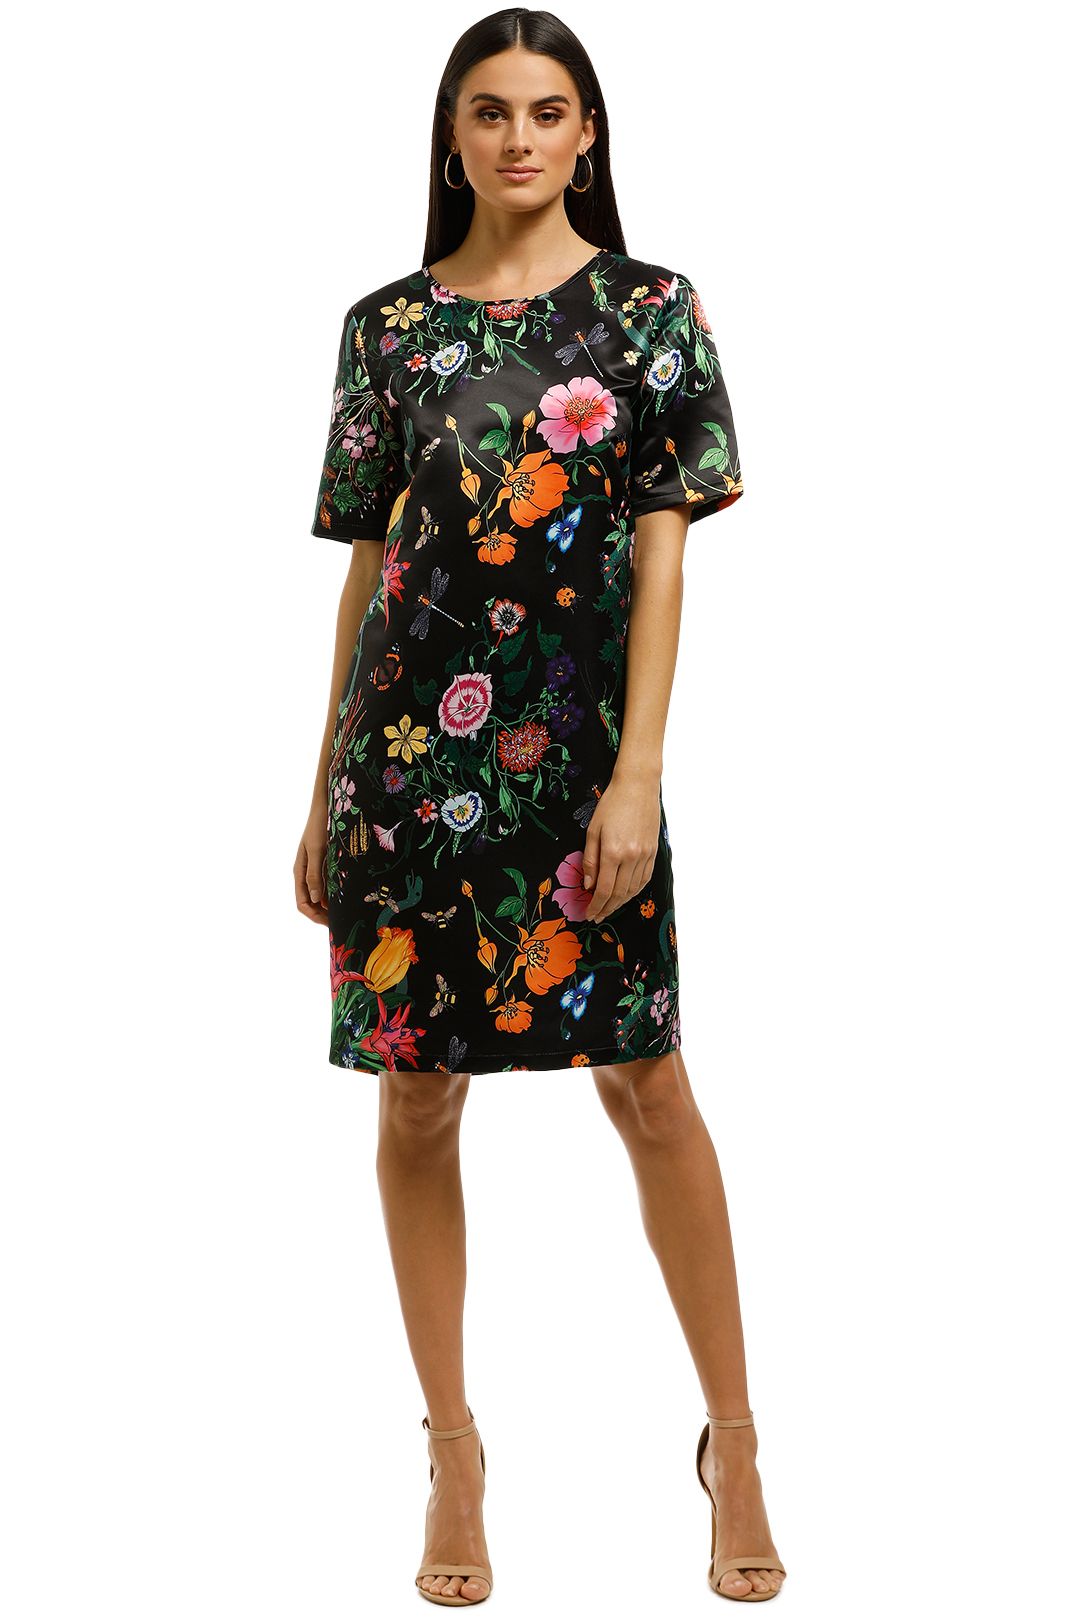 Curate-by-Trelise-Cooper-Short-Shift-Dress-Front